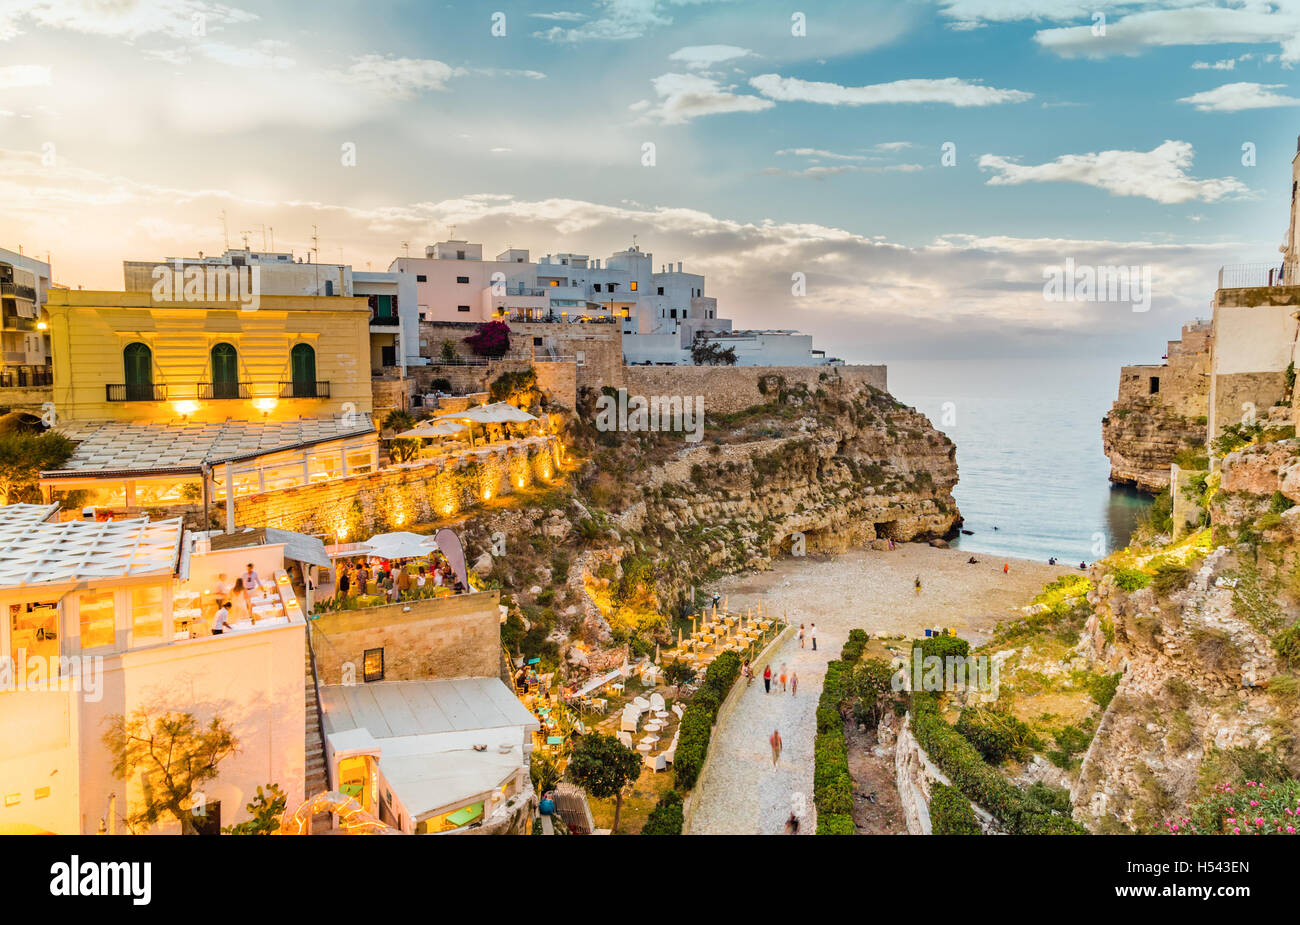 time of dusk on the village of Polignano, in Puglia, Italy Stock Photo